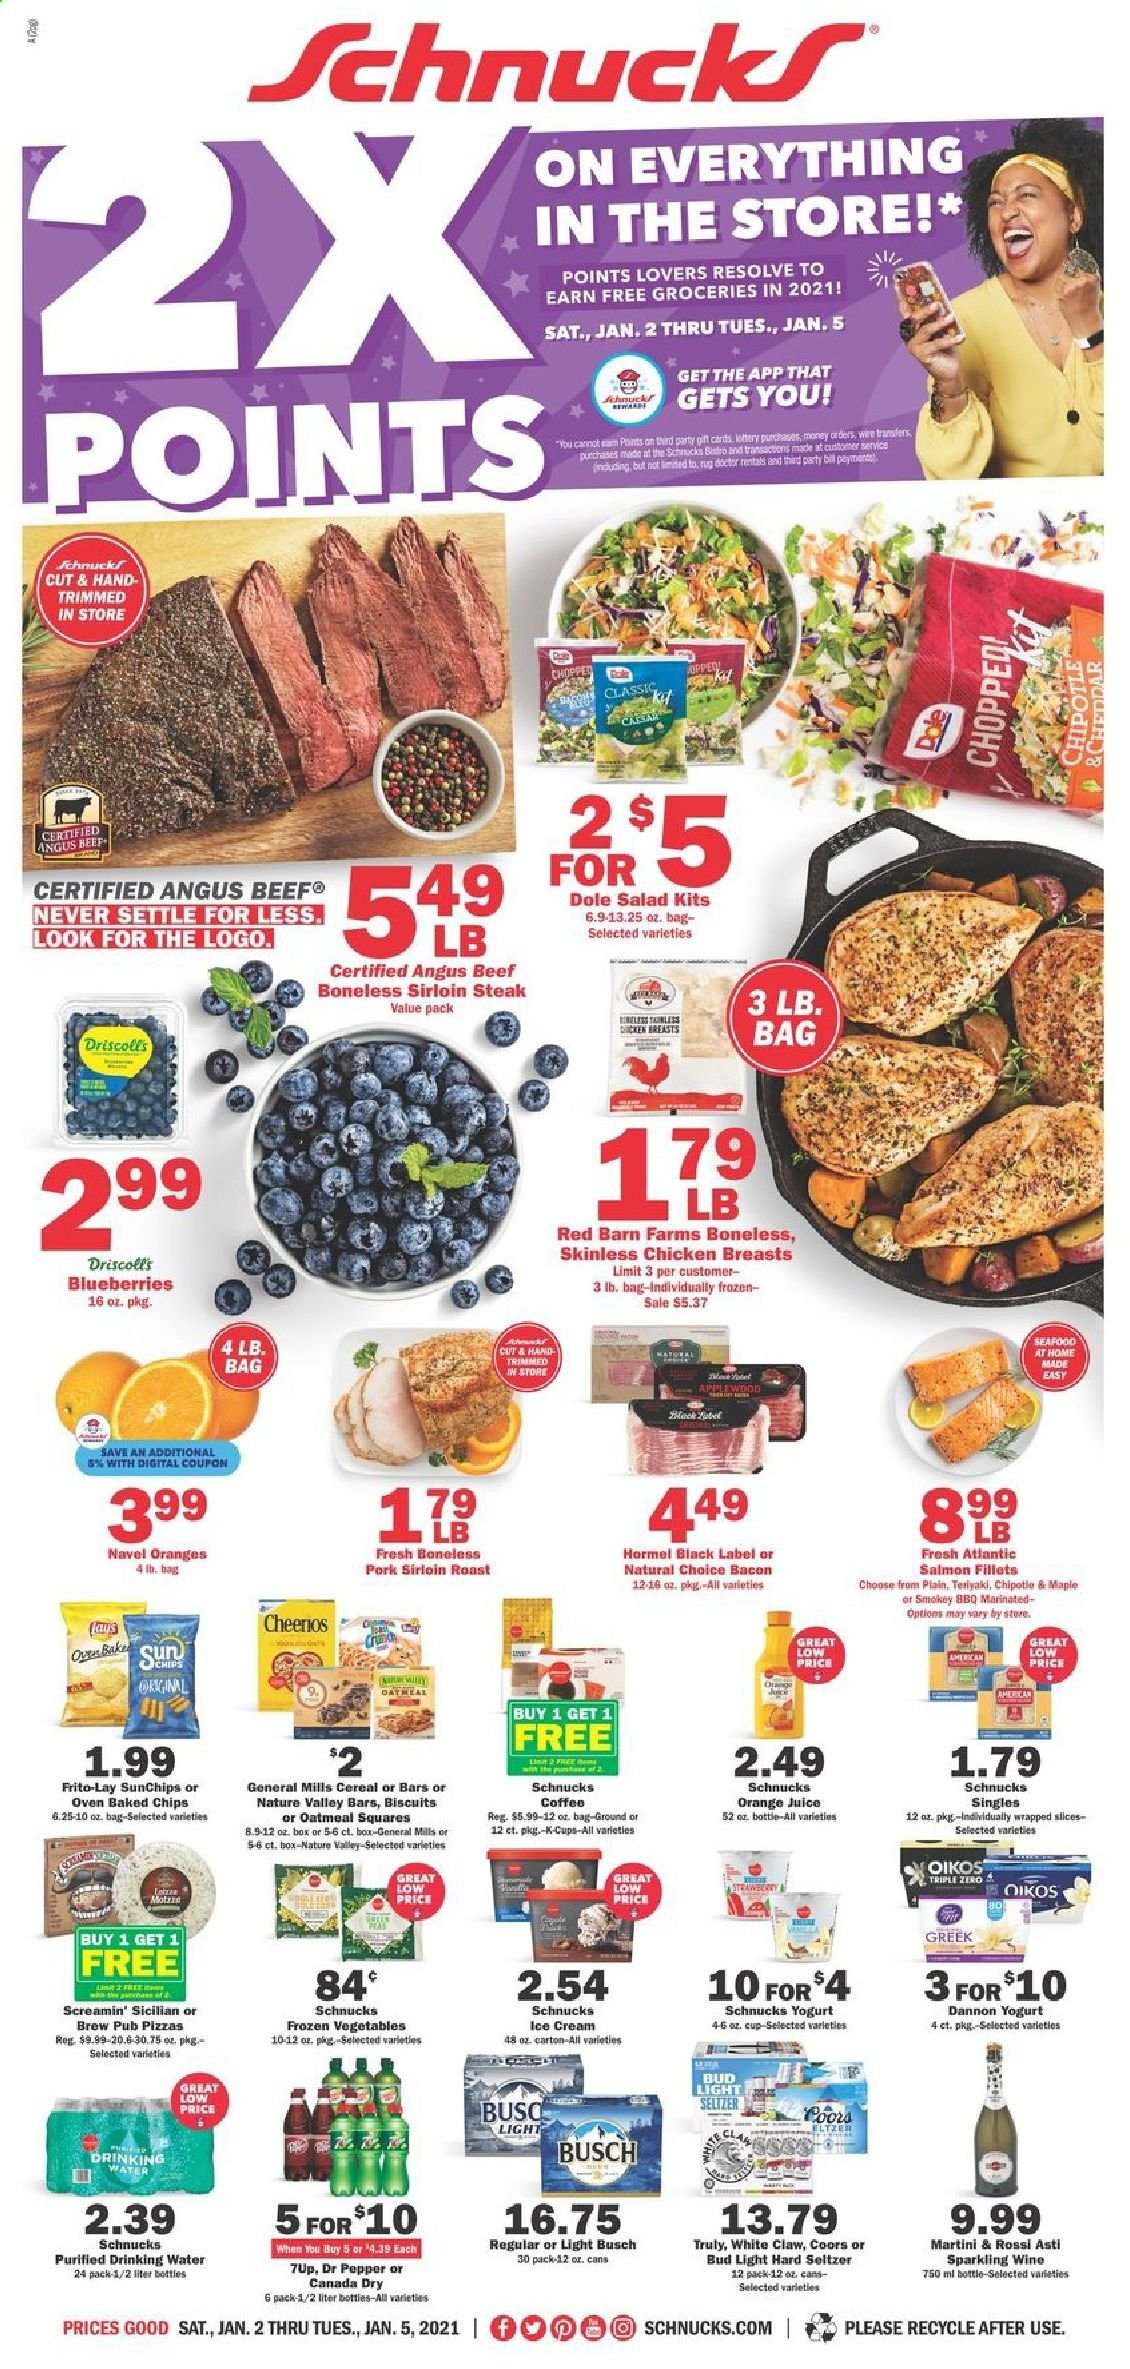 thumbnail - Schnucks Flyer - 01/02/2021 - 01/05/2021 - Sales products - Coors, Dole, blueberries, seafood, pizza, salad, Hormel, bacon, cheddar, yoghurt, Oikos, Dannon, ice cream, frozen vegetables, Screamin' Sicilian, biscuit, Frito-Lay, oatmeal, cereals, Cheerios, Nature Valley, teriyaki sauce, Canada Dry, orange juice, juice, Dr. Pepper, 7UP, seltzer water, coffee, coffee capsules, K-Cups, sparkling wine, wine, Martini, White Claw, Hard Seltzer, TRULY, beer, Busch, Bud Light, chicken breasts, beef meat, beef sirloin, steak, sirloin steak, pork loin. Page 1.